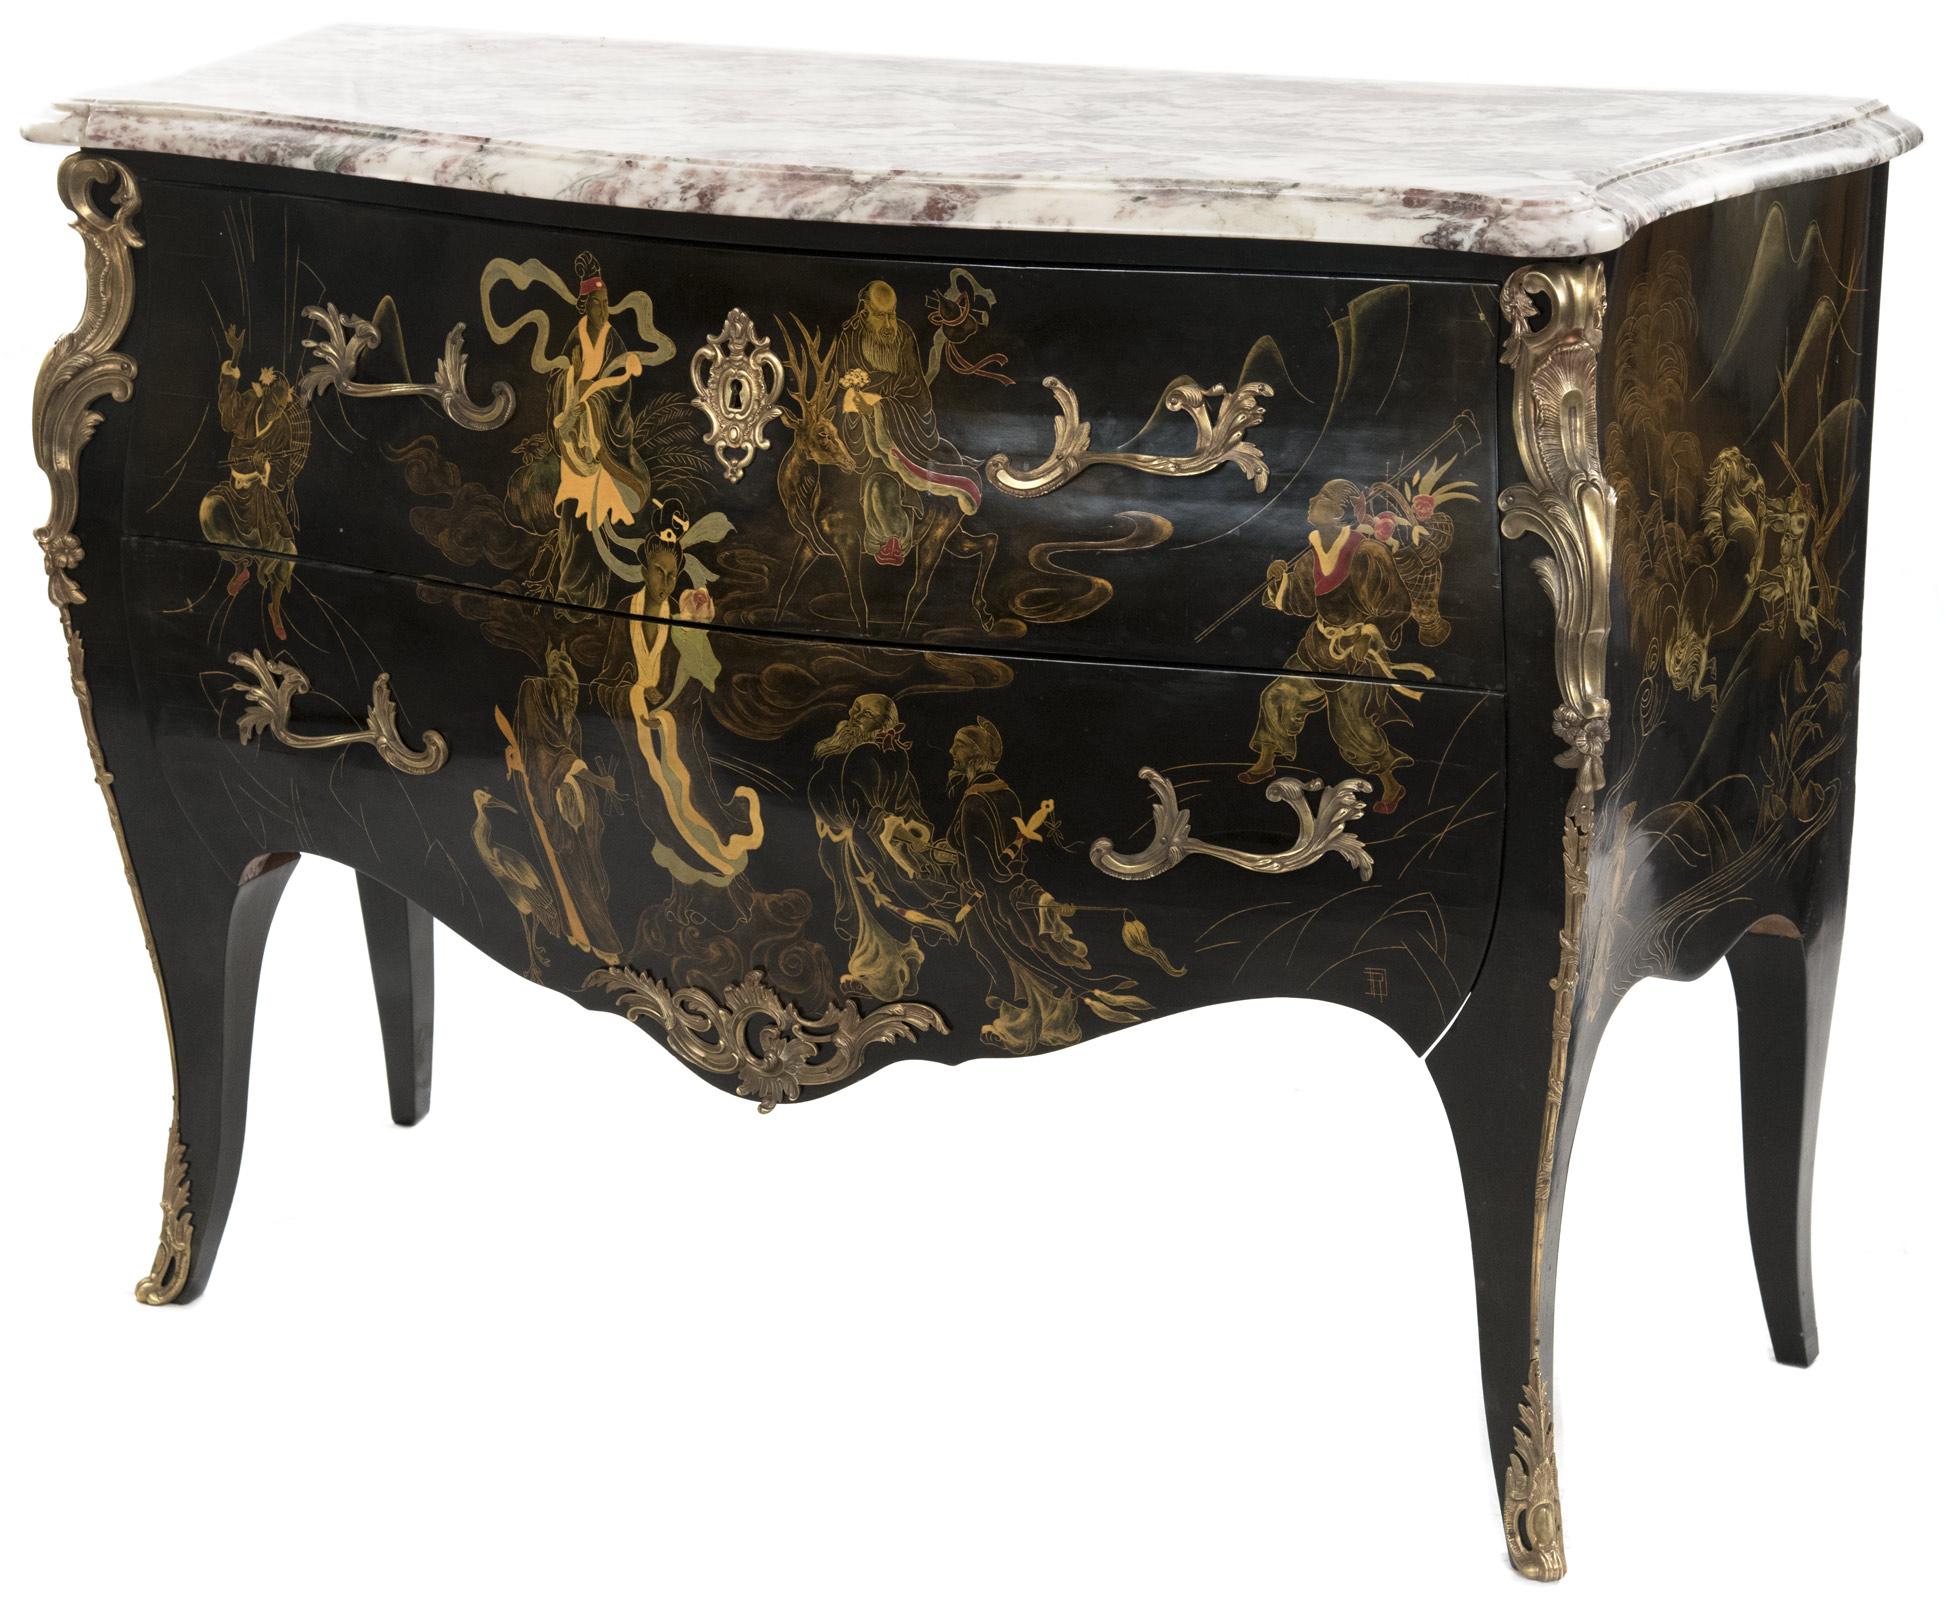 A French Louis XV style commode of bombe form with a lacquered black body decorated with chinoiserie designs on three sides depicting deities, the two drawers mounted with finely chased ormolu pulls and escutcheon plate, flanked by canted corners